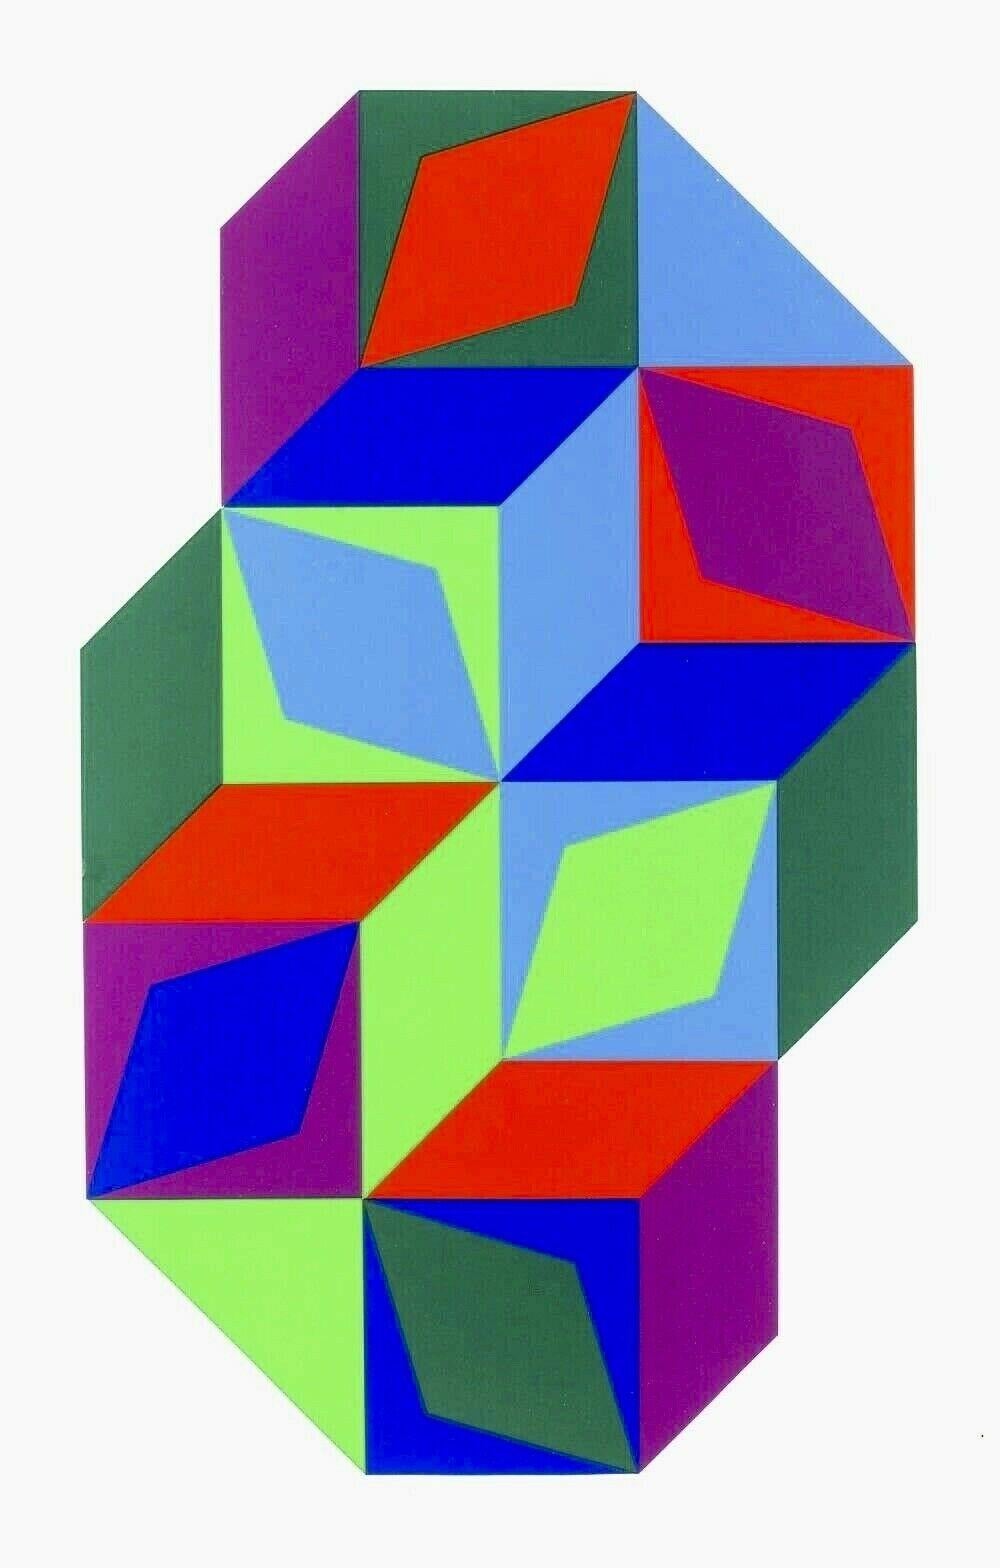 VICTOR VASARELY (1908-1997) Internationally recognized as one of the most important artists of the 20th century. He is the acknowledged leader of the Op Art movement, and his innovations in color and optical illusion have had a strong influence on